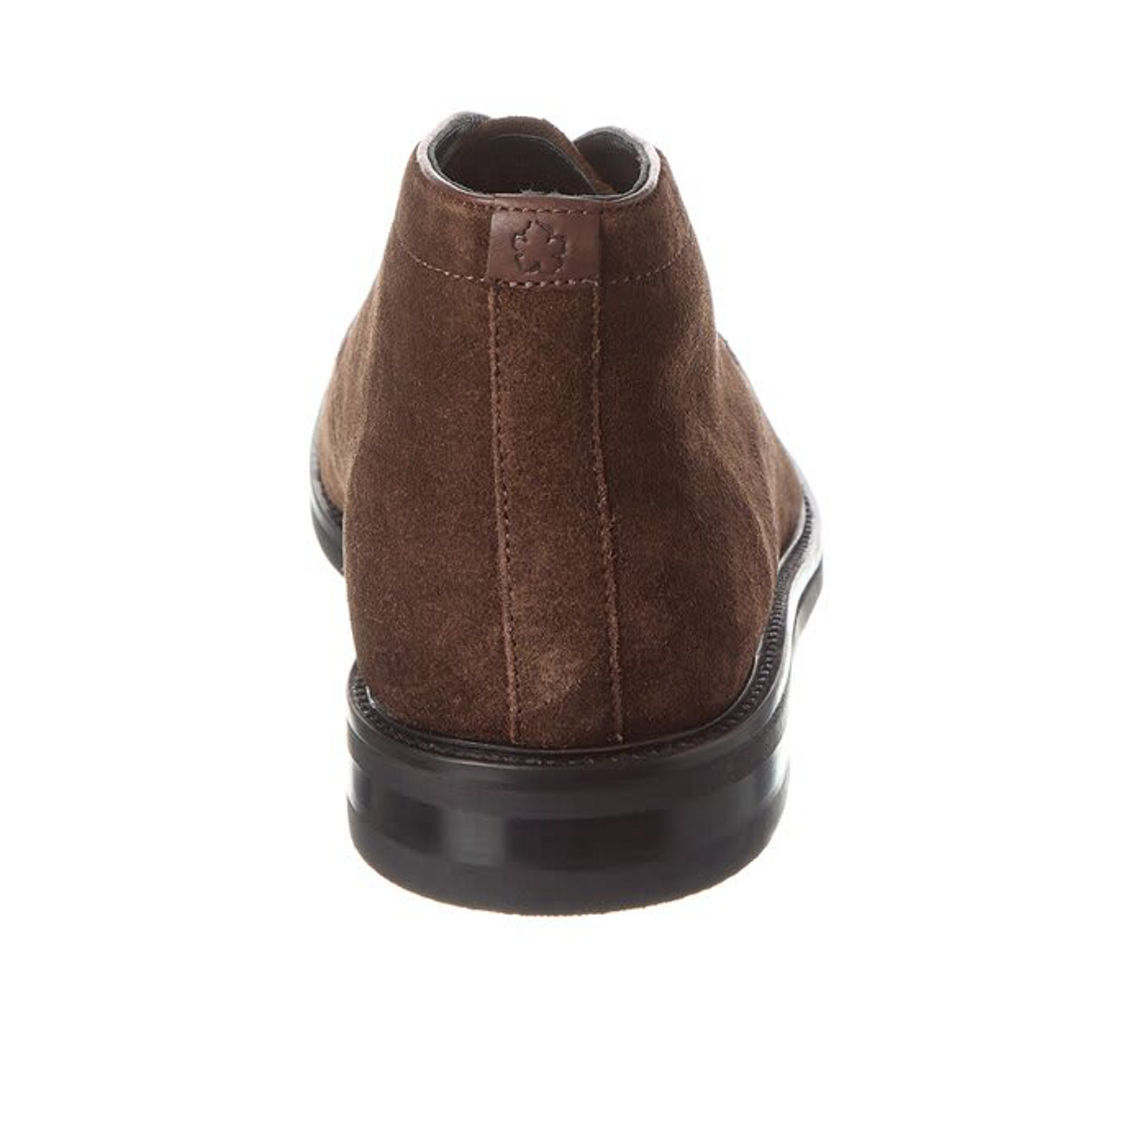 Ted Baker Andrews Suede Chukka Boot - Image 3 of 4